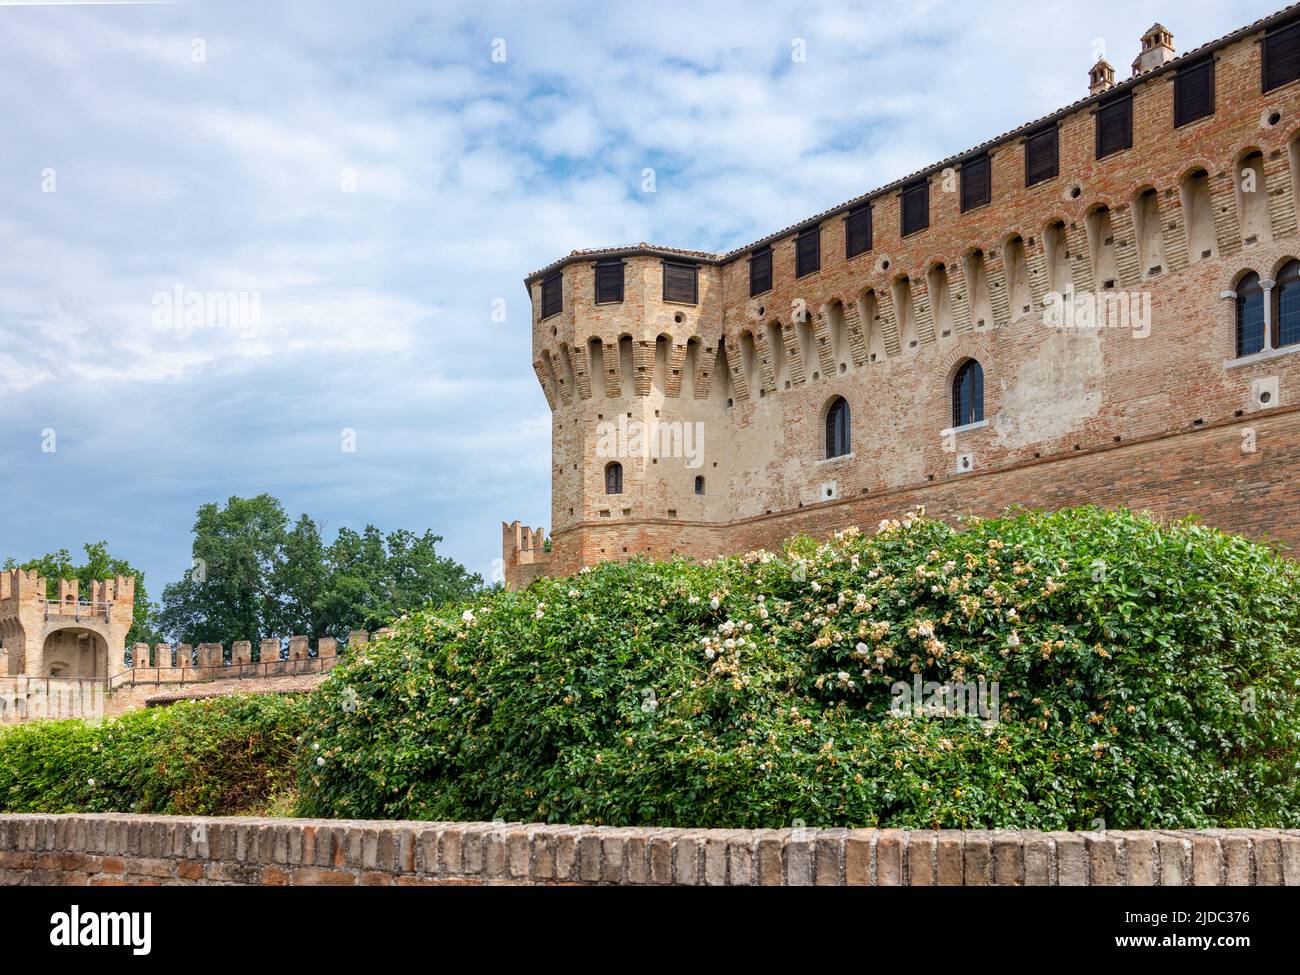 Gradara, Italy - May 29, 2018: View of the Malatesta Fortress with the etrance and the garden Stock Photo